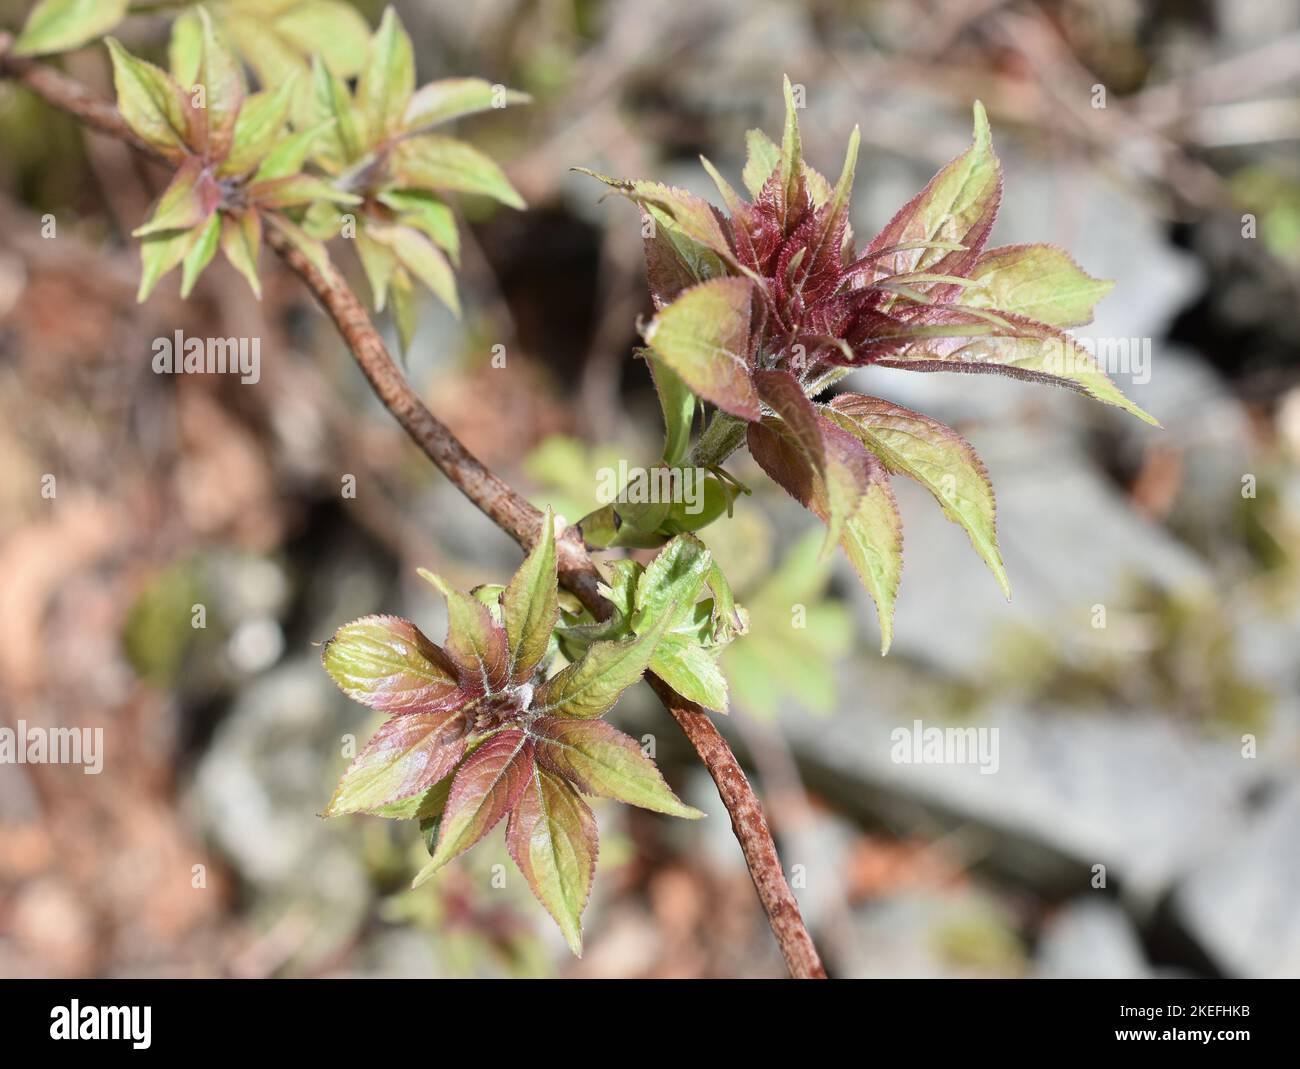 Branch from red-berried elder tree with new leaves in spring Stock Photo